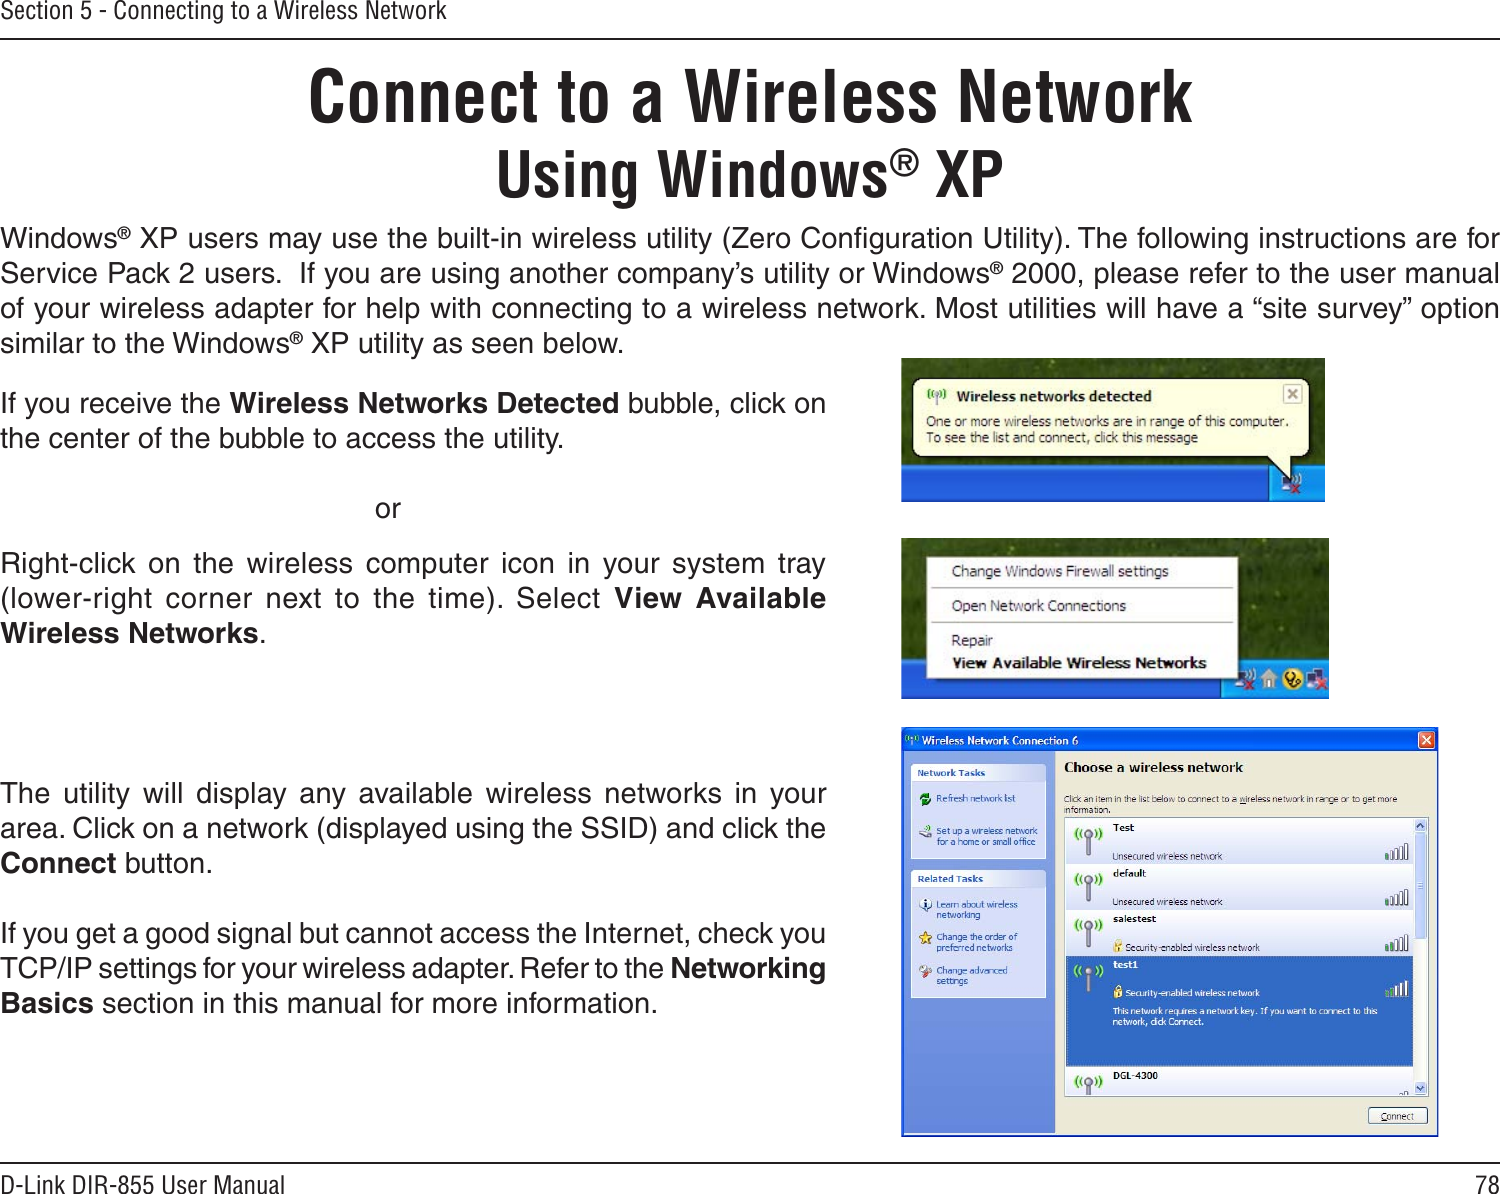 78D-Link DIR-855 User ManualSection 5 - Connecting to a Wireless NetworkConnect to a Wireless NetworkUsing Windows® XPWindows® XP users may use the built-in wireless utility (Zero Conﬁguration Utility). The following instructions are for Service Pack 2 users.  If you are using another company’s utility or Windows® 2000, please refer to the user manual of your wireless adapter for help with connecting to a wireless network. Most utilities will have a “site survey” option similar to the Windows® XP utility as seen below.Right-click  on  the  wireless  computer  icon  in  your  system  tray (lower-right  corner  next  to  the  time).  Select  View  Available Wireless Networks.If you receive the Wireless Networks Detected bubble, click on the center of the bubble to access the utility.     orThe  utility  will  display  any  available  wireless  networks  in  your area. Click on a network (displayed using the SSID) and click the Connect button.If you get a good signal but cannot access the Internet, check you TCP/IP settings for your wireless adapter. Refer to the Networking Basics section in this manual for more information.